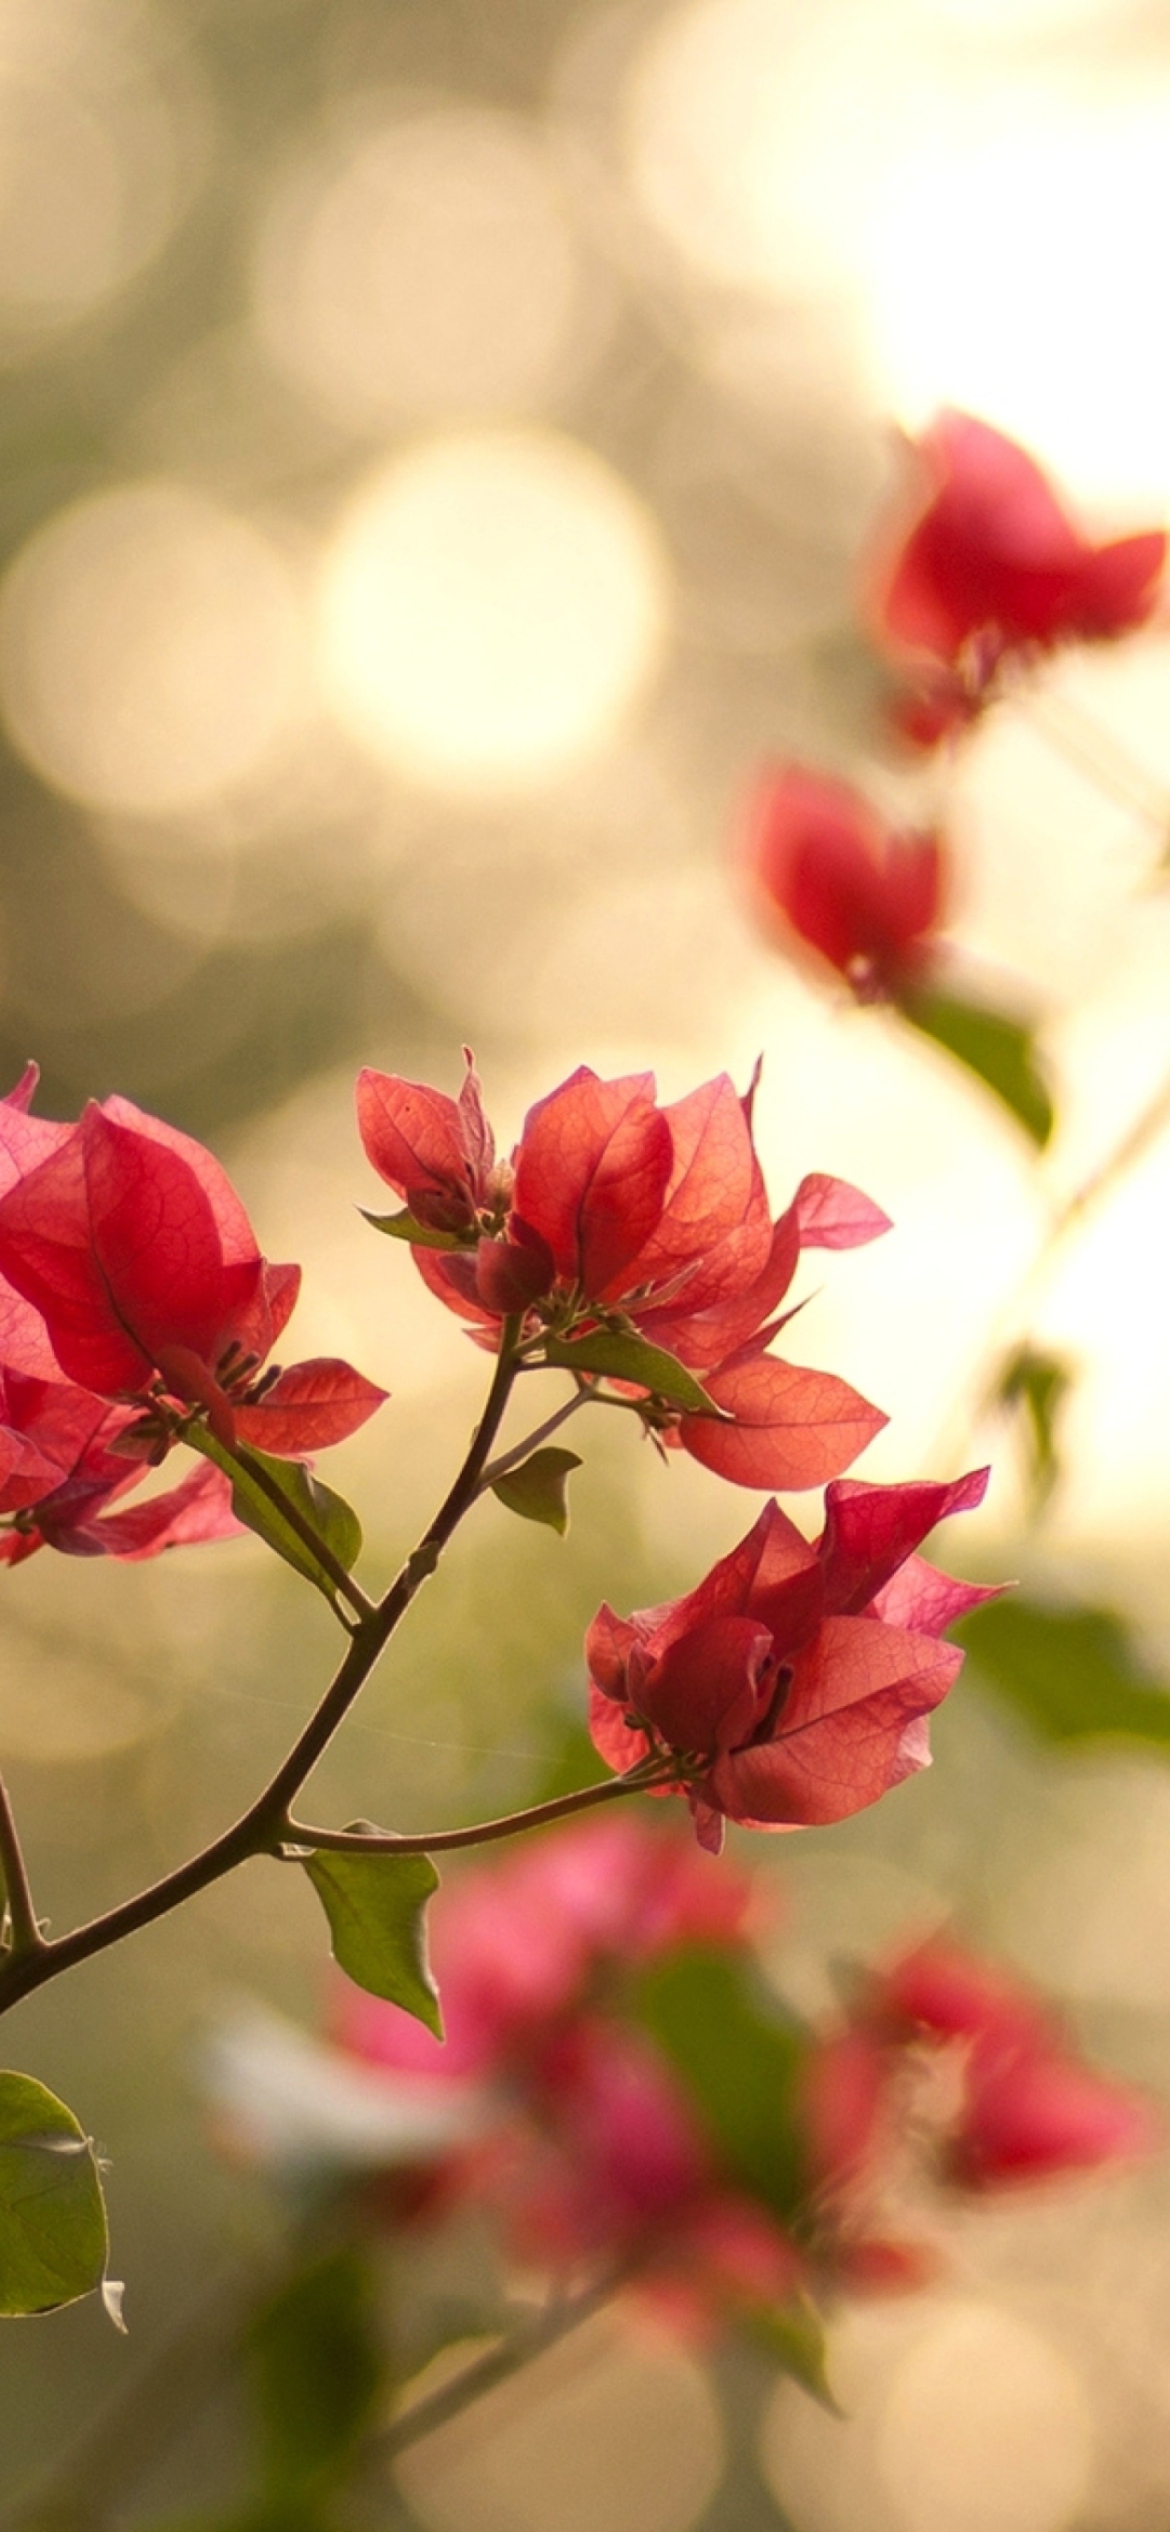 Das Branches With Red Petals Wallpaper 1170x2532